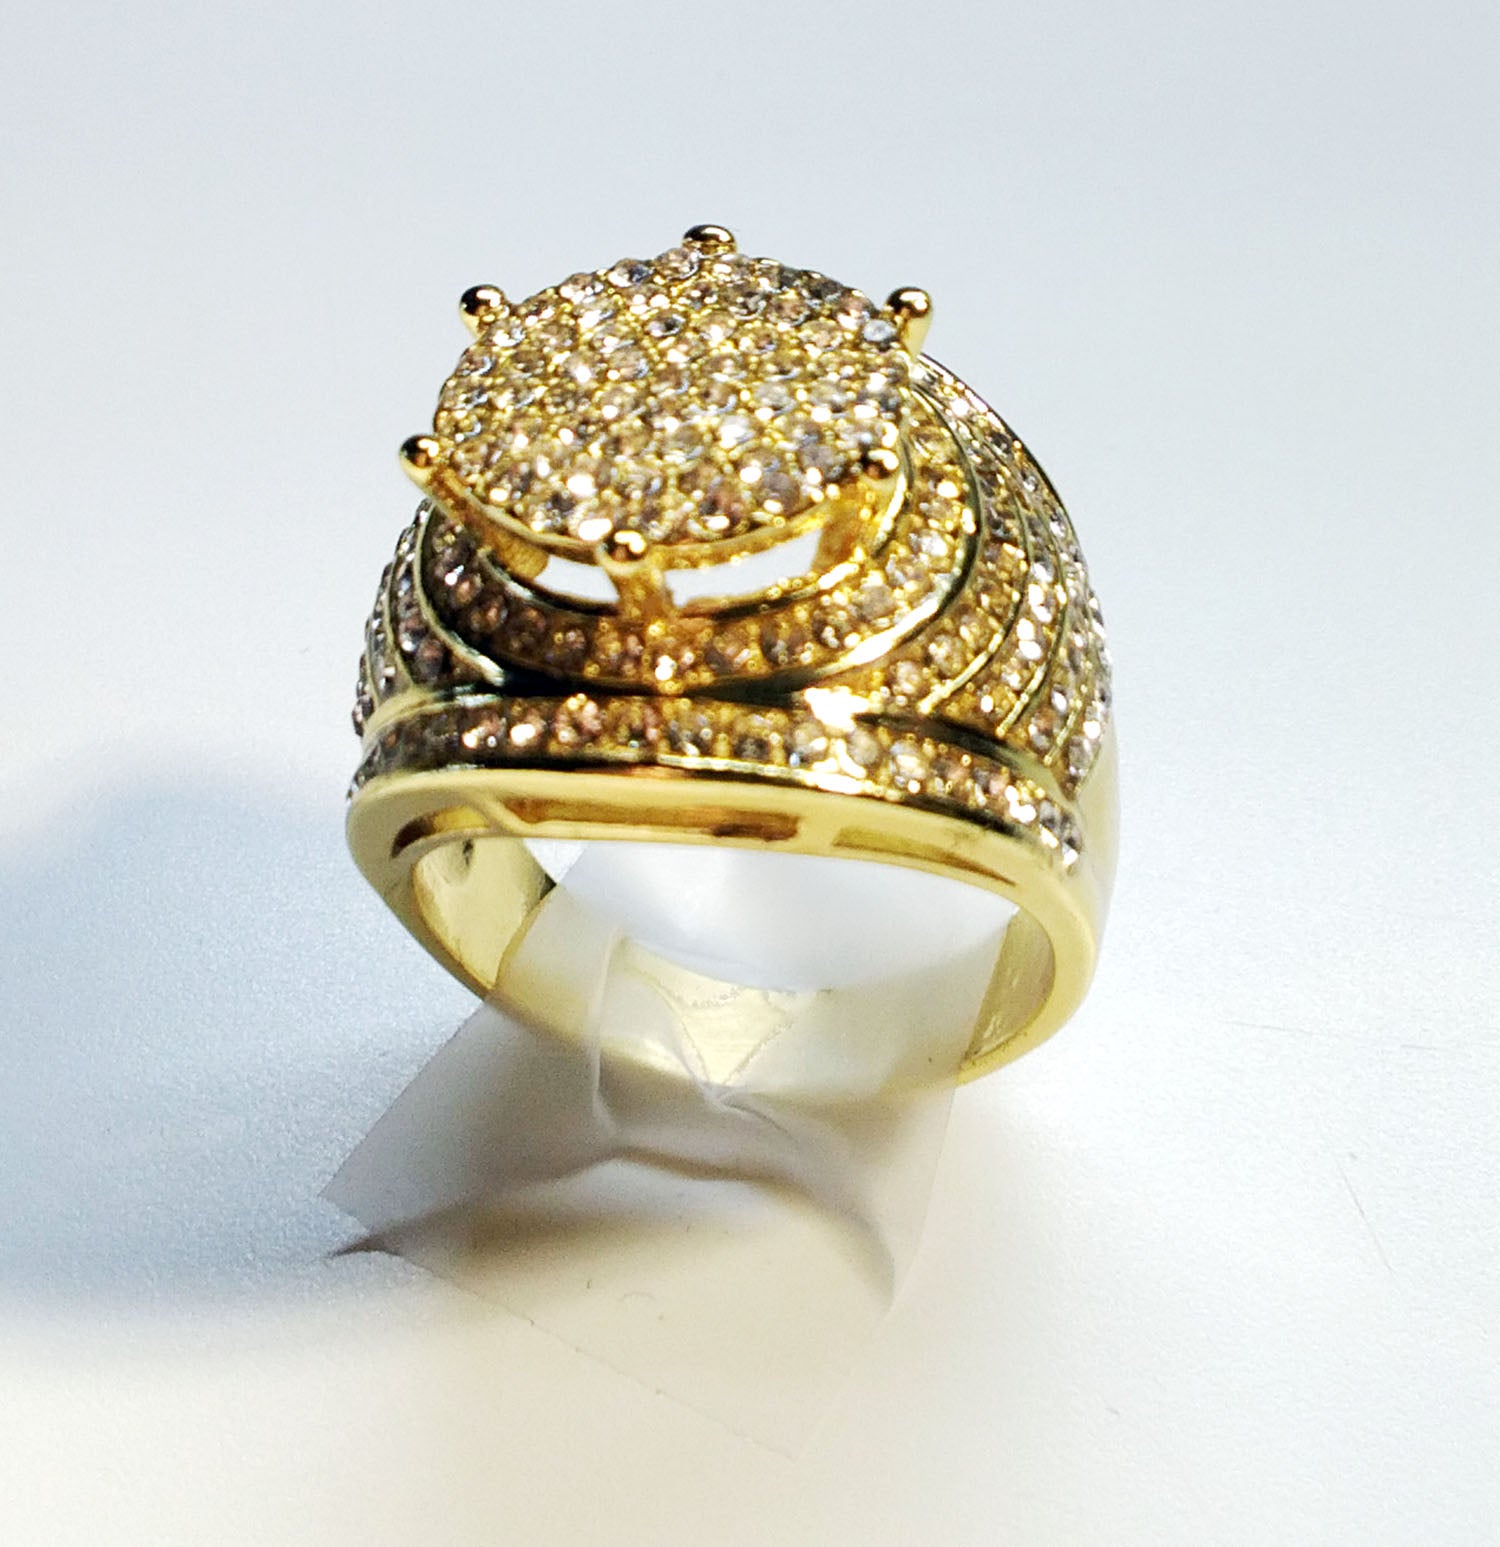 Men's bling ring - Providence silver gold jewelry usa